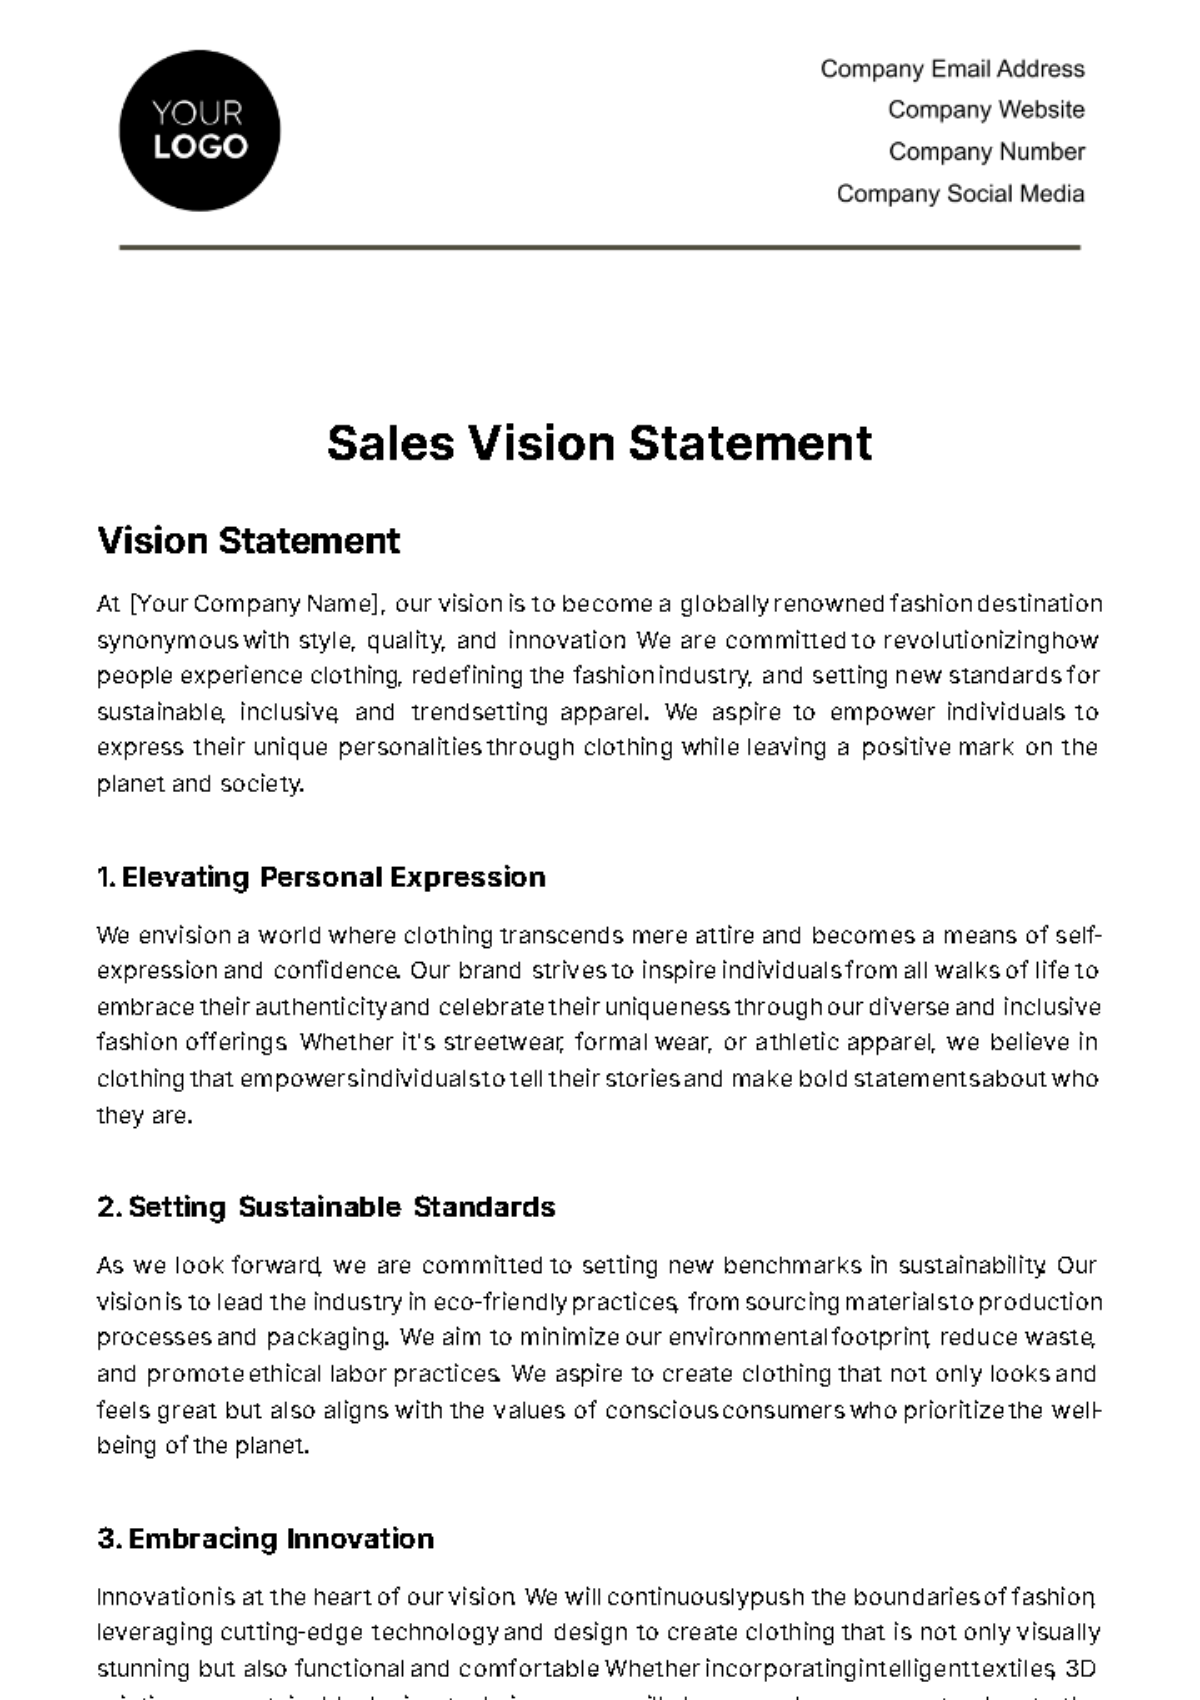 Sales Vision Statement Template